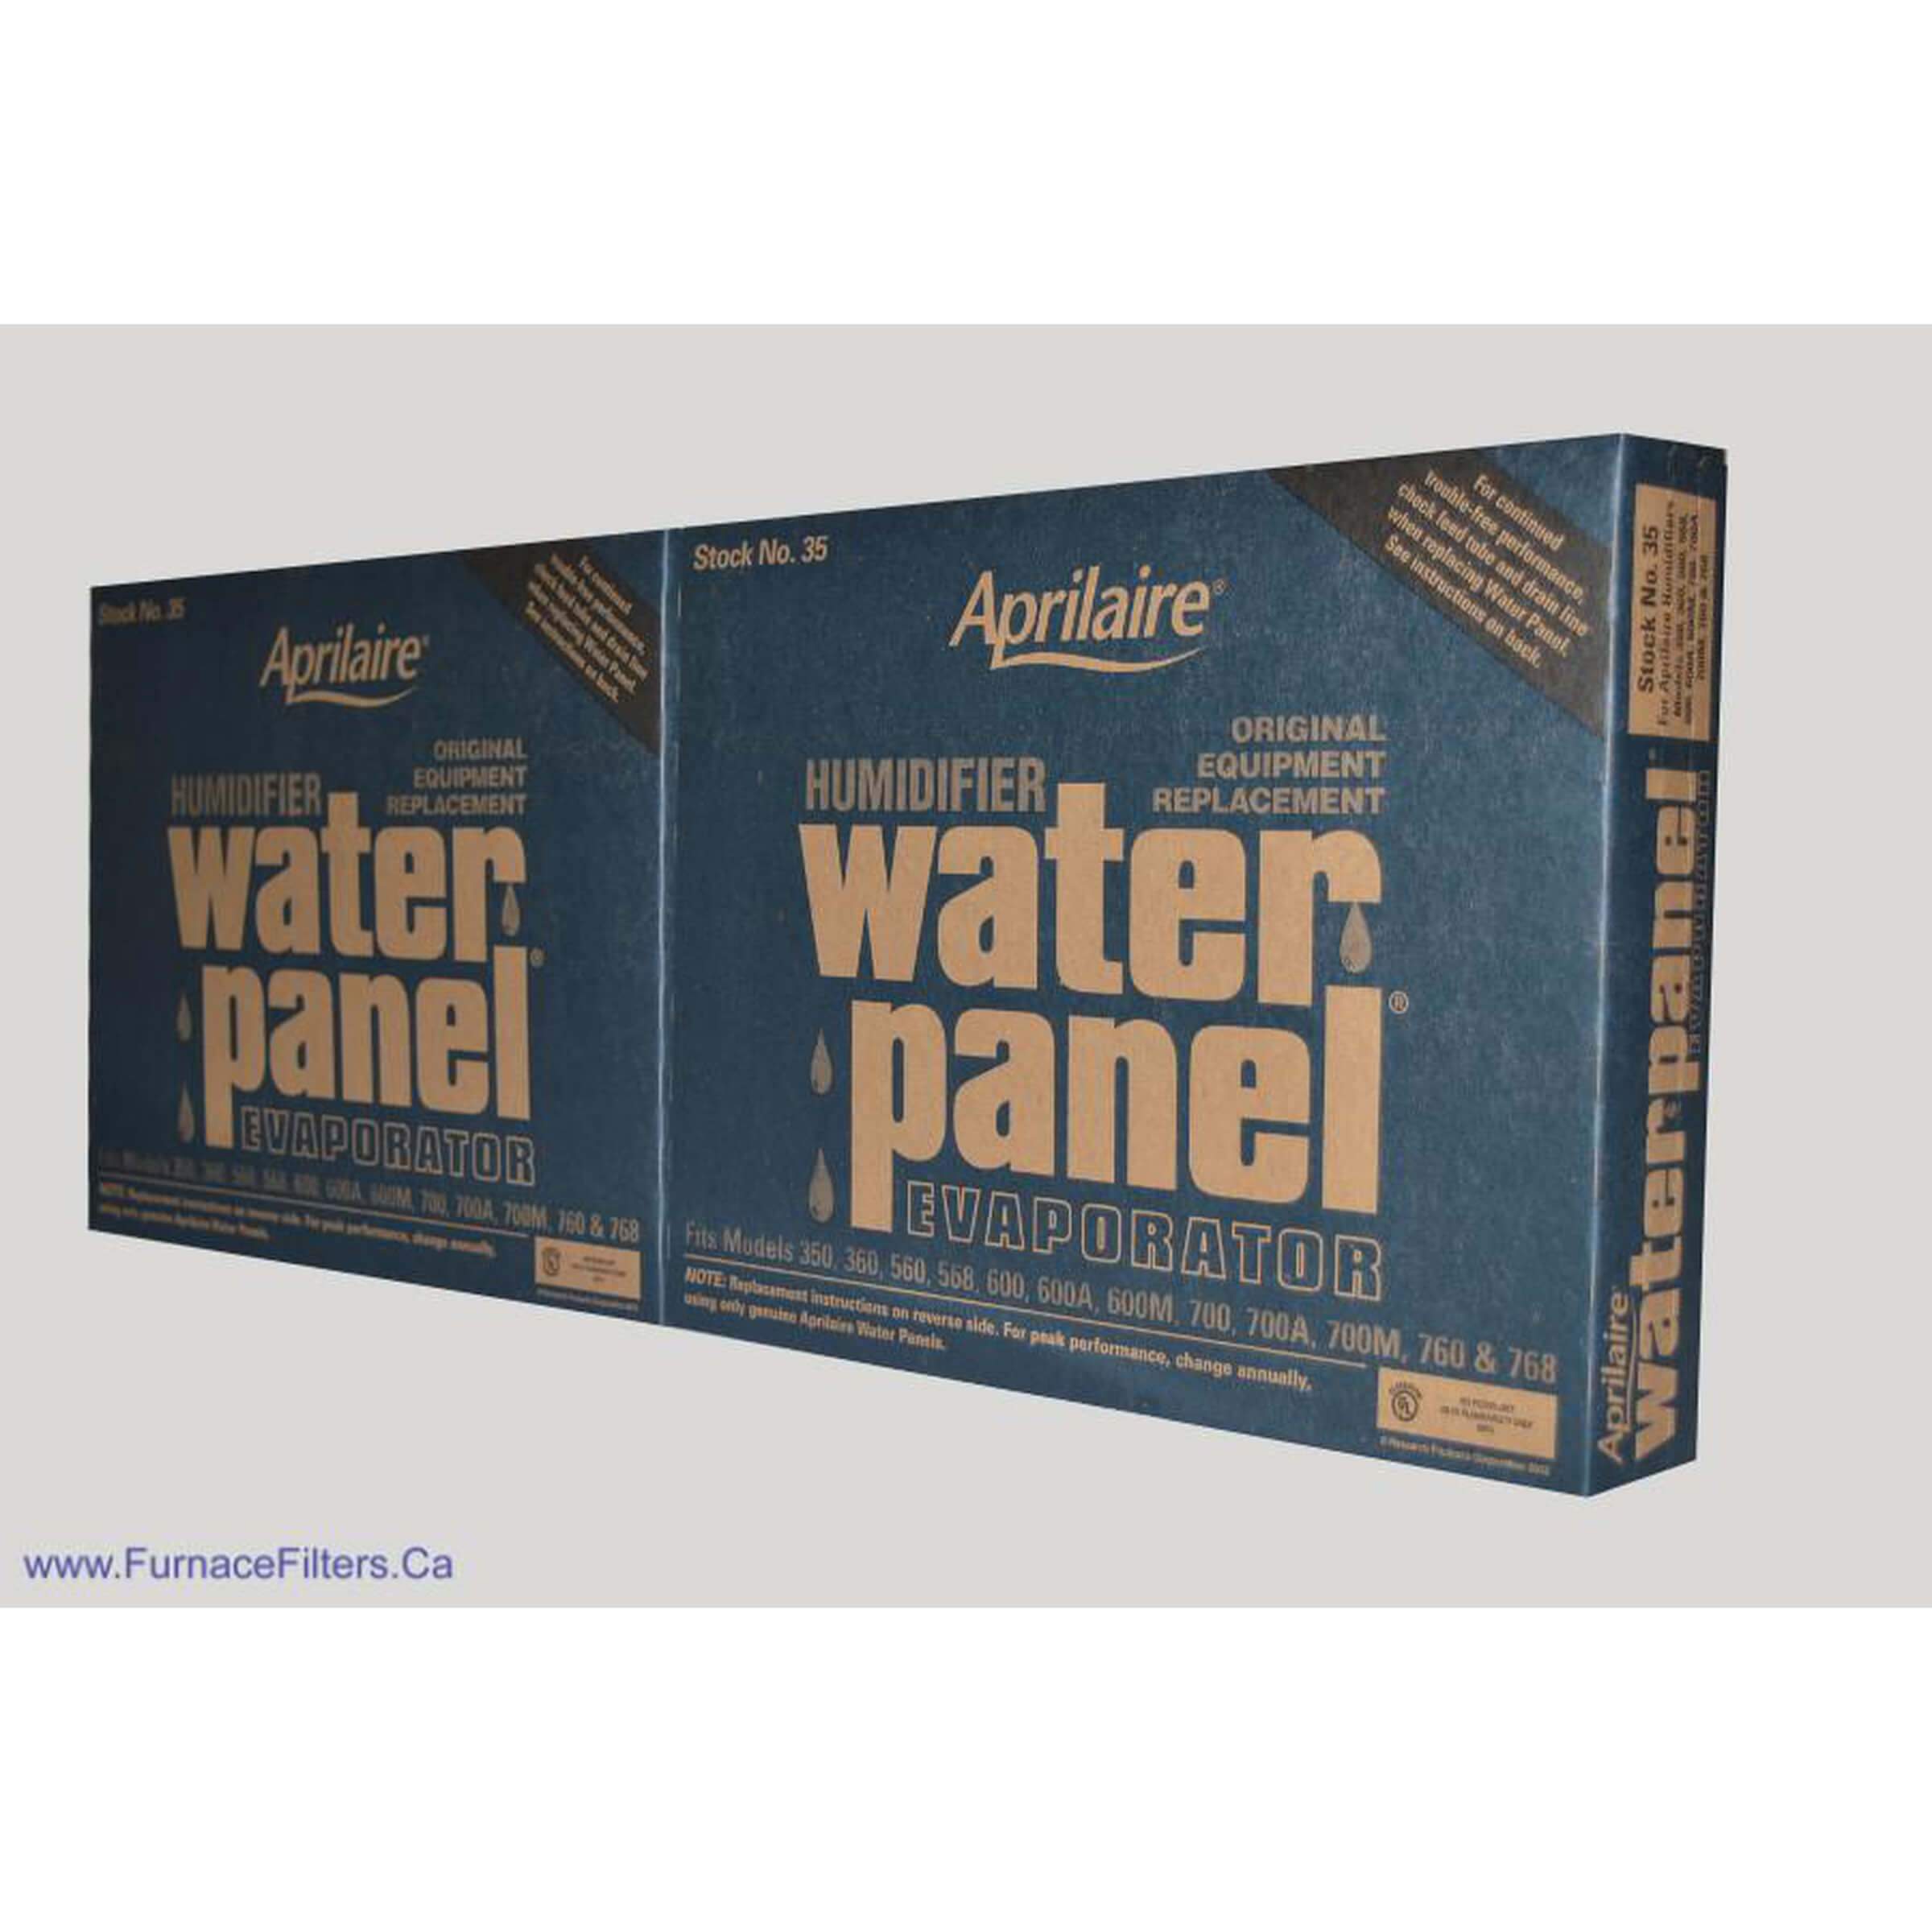 Aprilaire 35 Replacement Water Panel For Aprilaire Whole House Humidifier Models 350, 360, 560 560a, 568, 600, 600a, 600m, 700, 700a, 700m, 760, 760a, 768